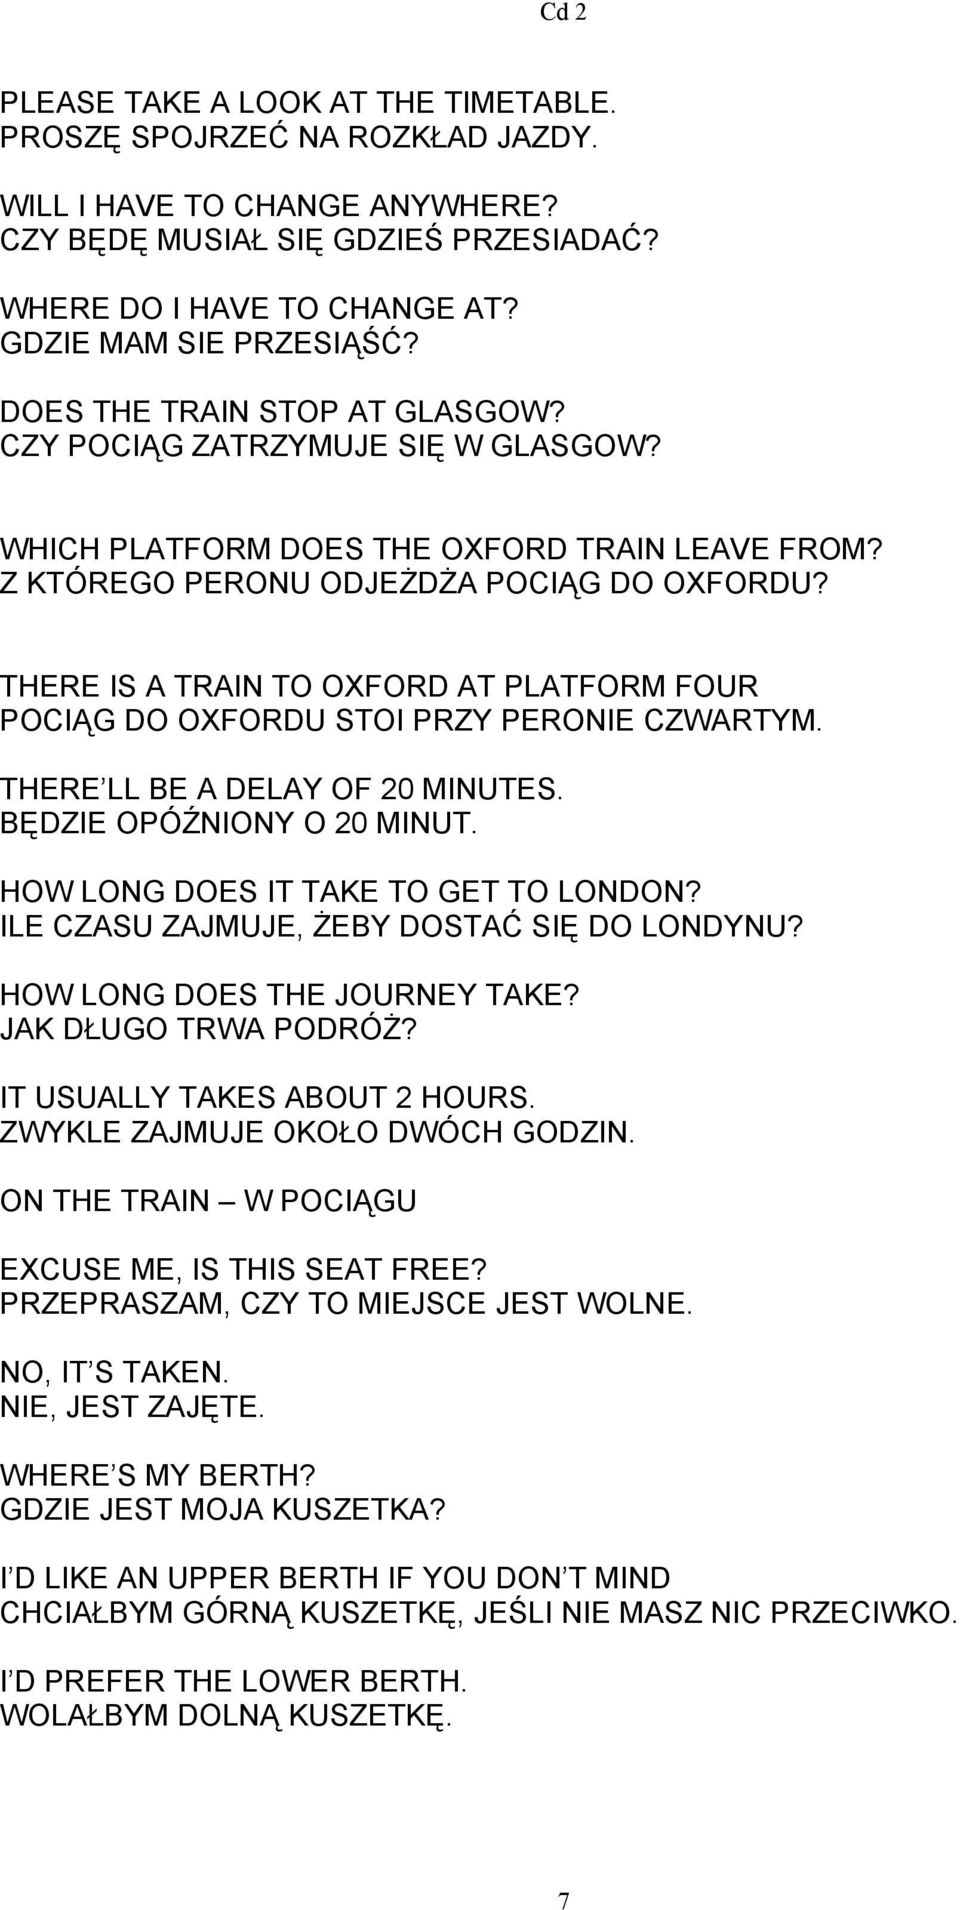 THERE IS A TRAIN TO OXFORD AT PLATFORM FOUR POCIĄG DO OXFORDU STOI PRZY PERONIE CZWARTYM. THERE LL BE A DELAY OF 20 MINUTES. BĘDZIE OPÓŹNIONY O 20 MINUT. HOW LONG DOES IT TAKE TO GET TO LONDON?